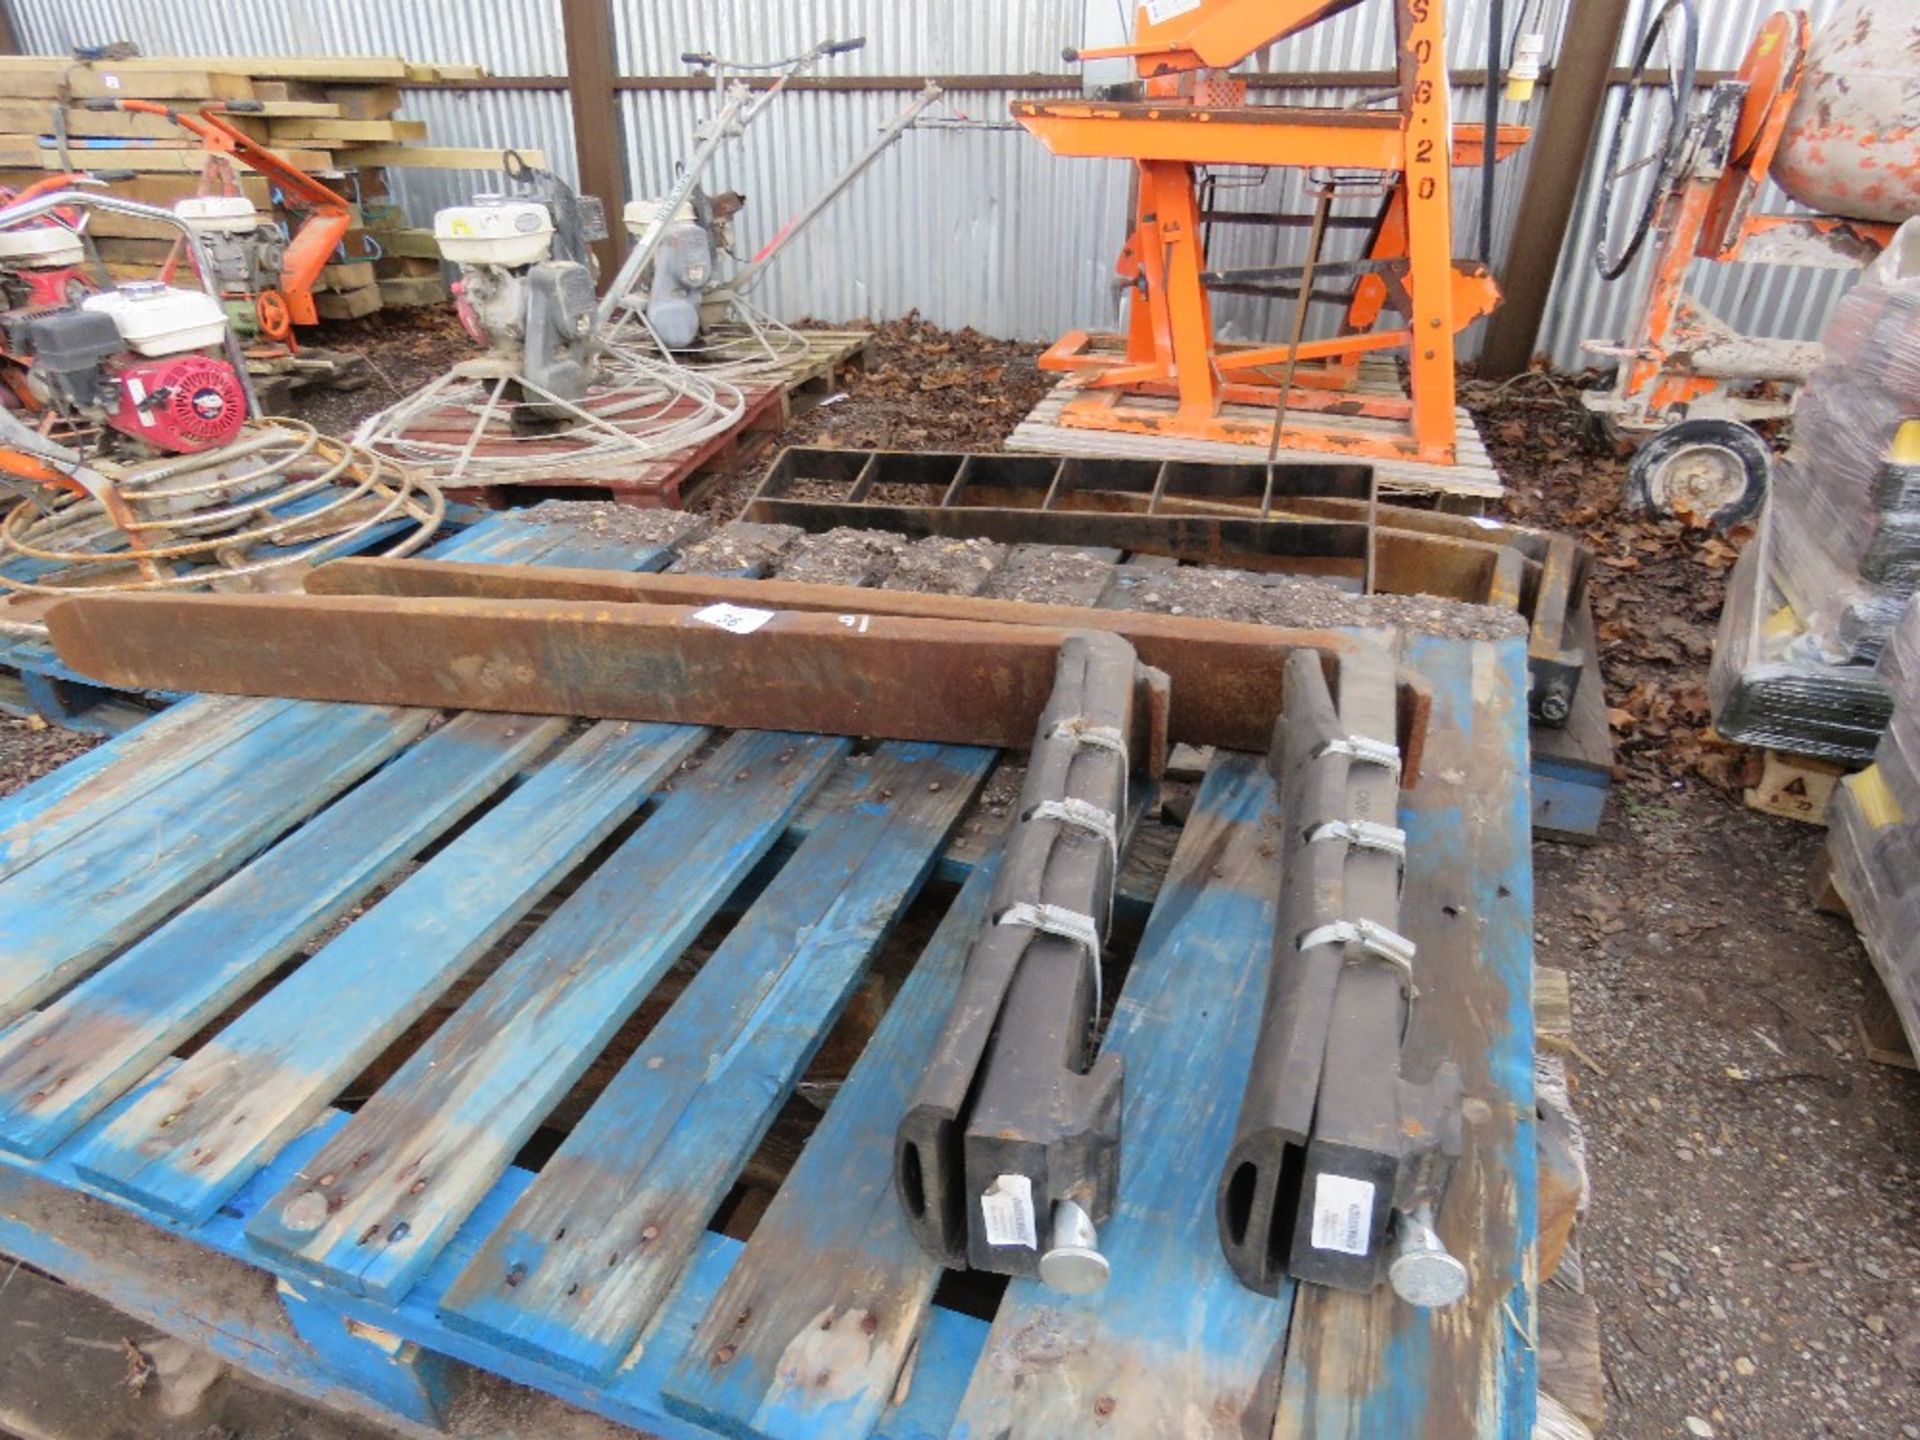 3 X PAIRS OF FORKLIFT TINES: 2 FOR 16" CARRIAGE AND 1 FOR 20" CARRIAGE. - Image 2 of 5